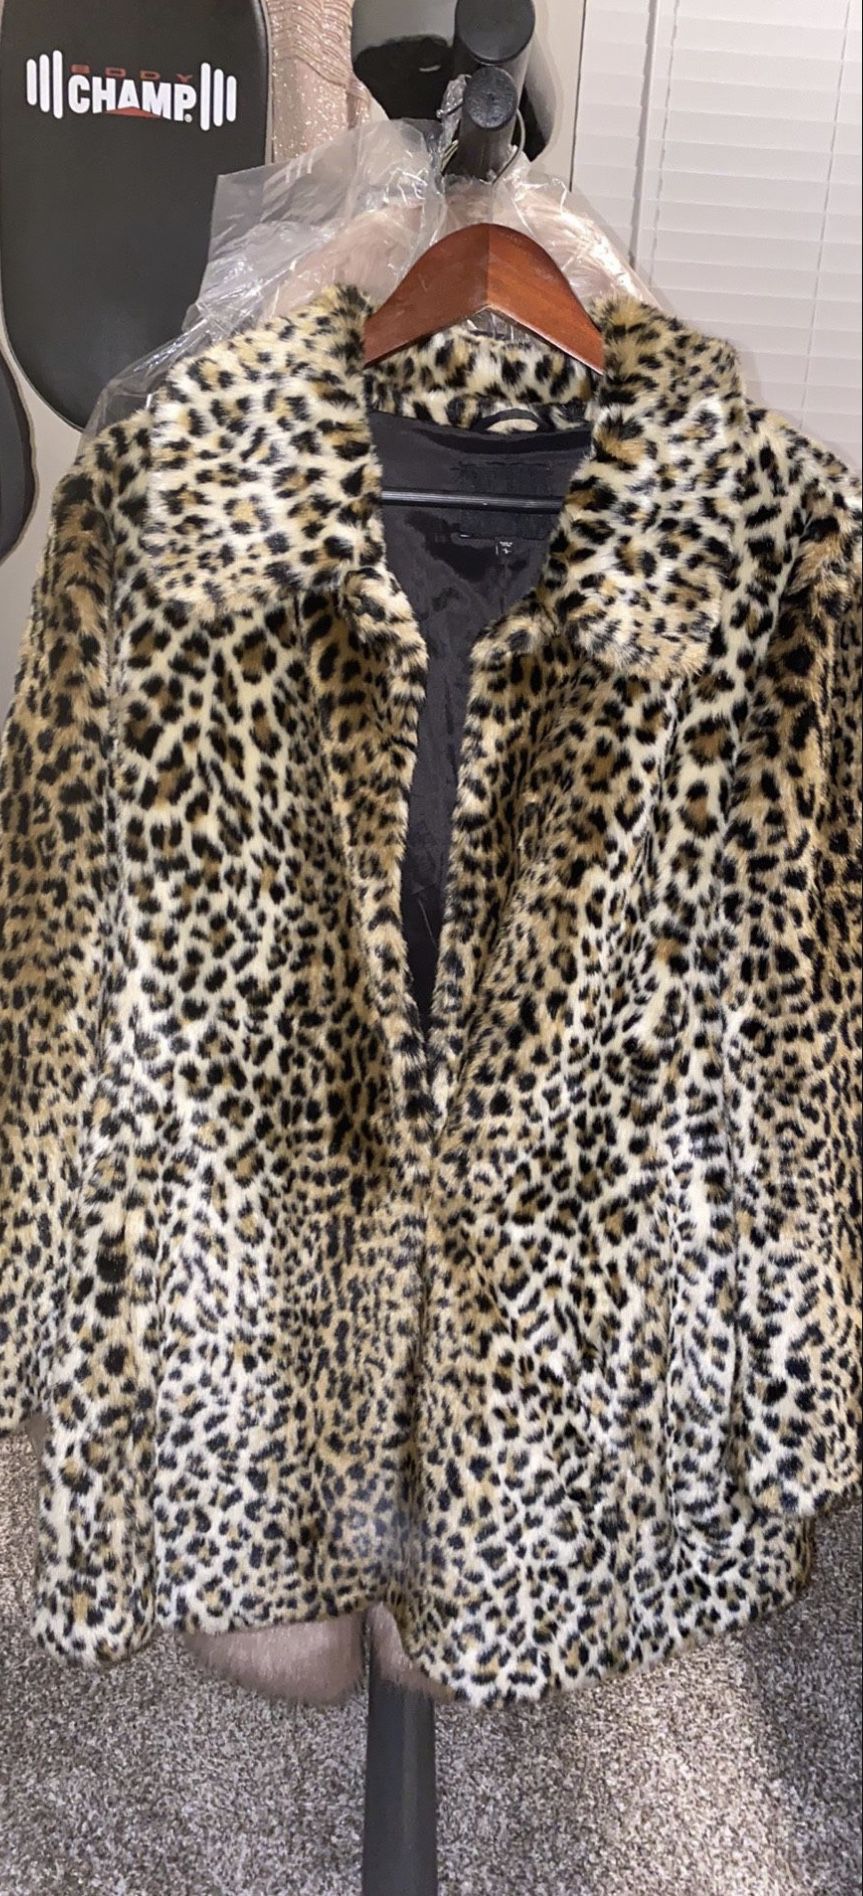 Fur Coats & Jackets for sale in Houston, Texas